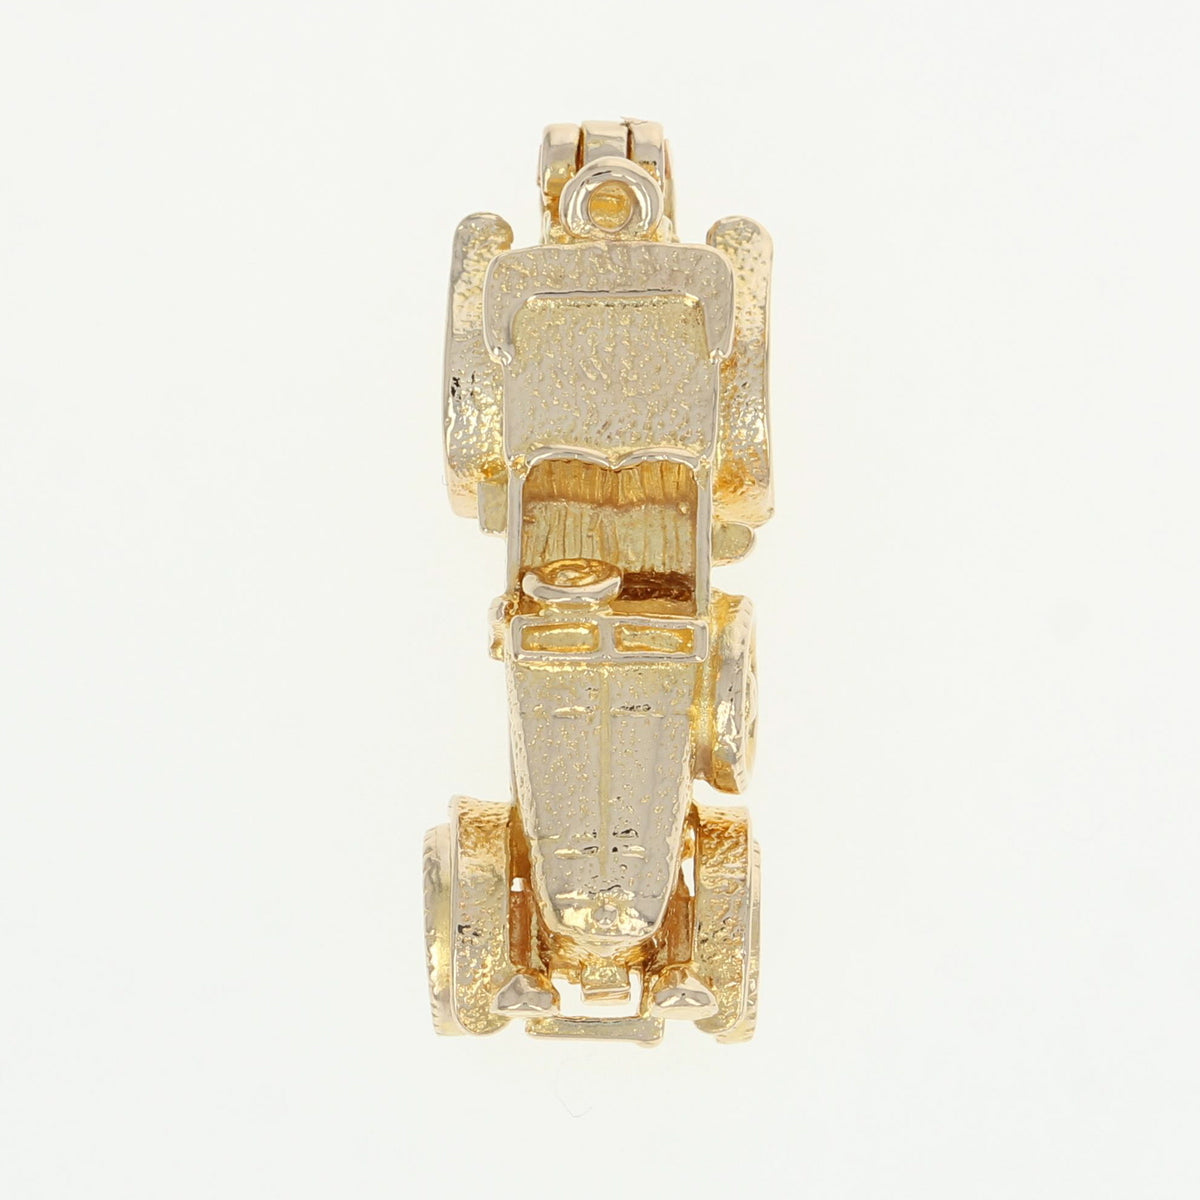 Classic Automobile Charm - 9k Yellow Gold Opens Car's Wheels Move